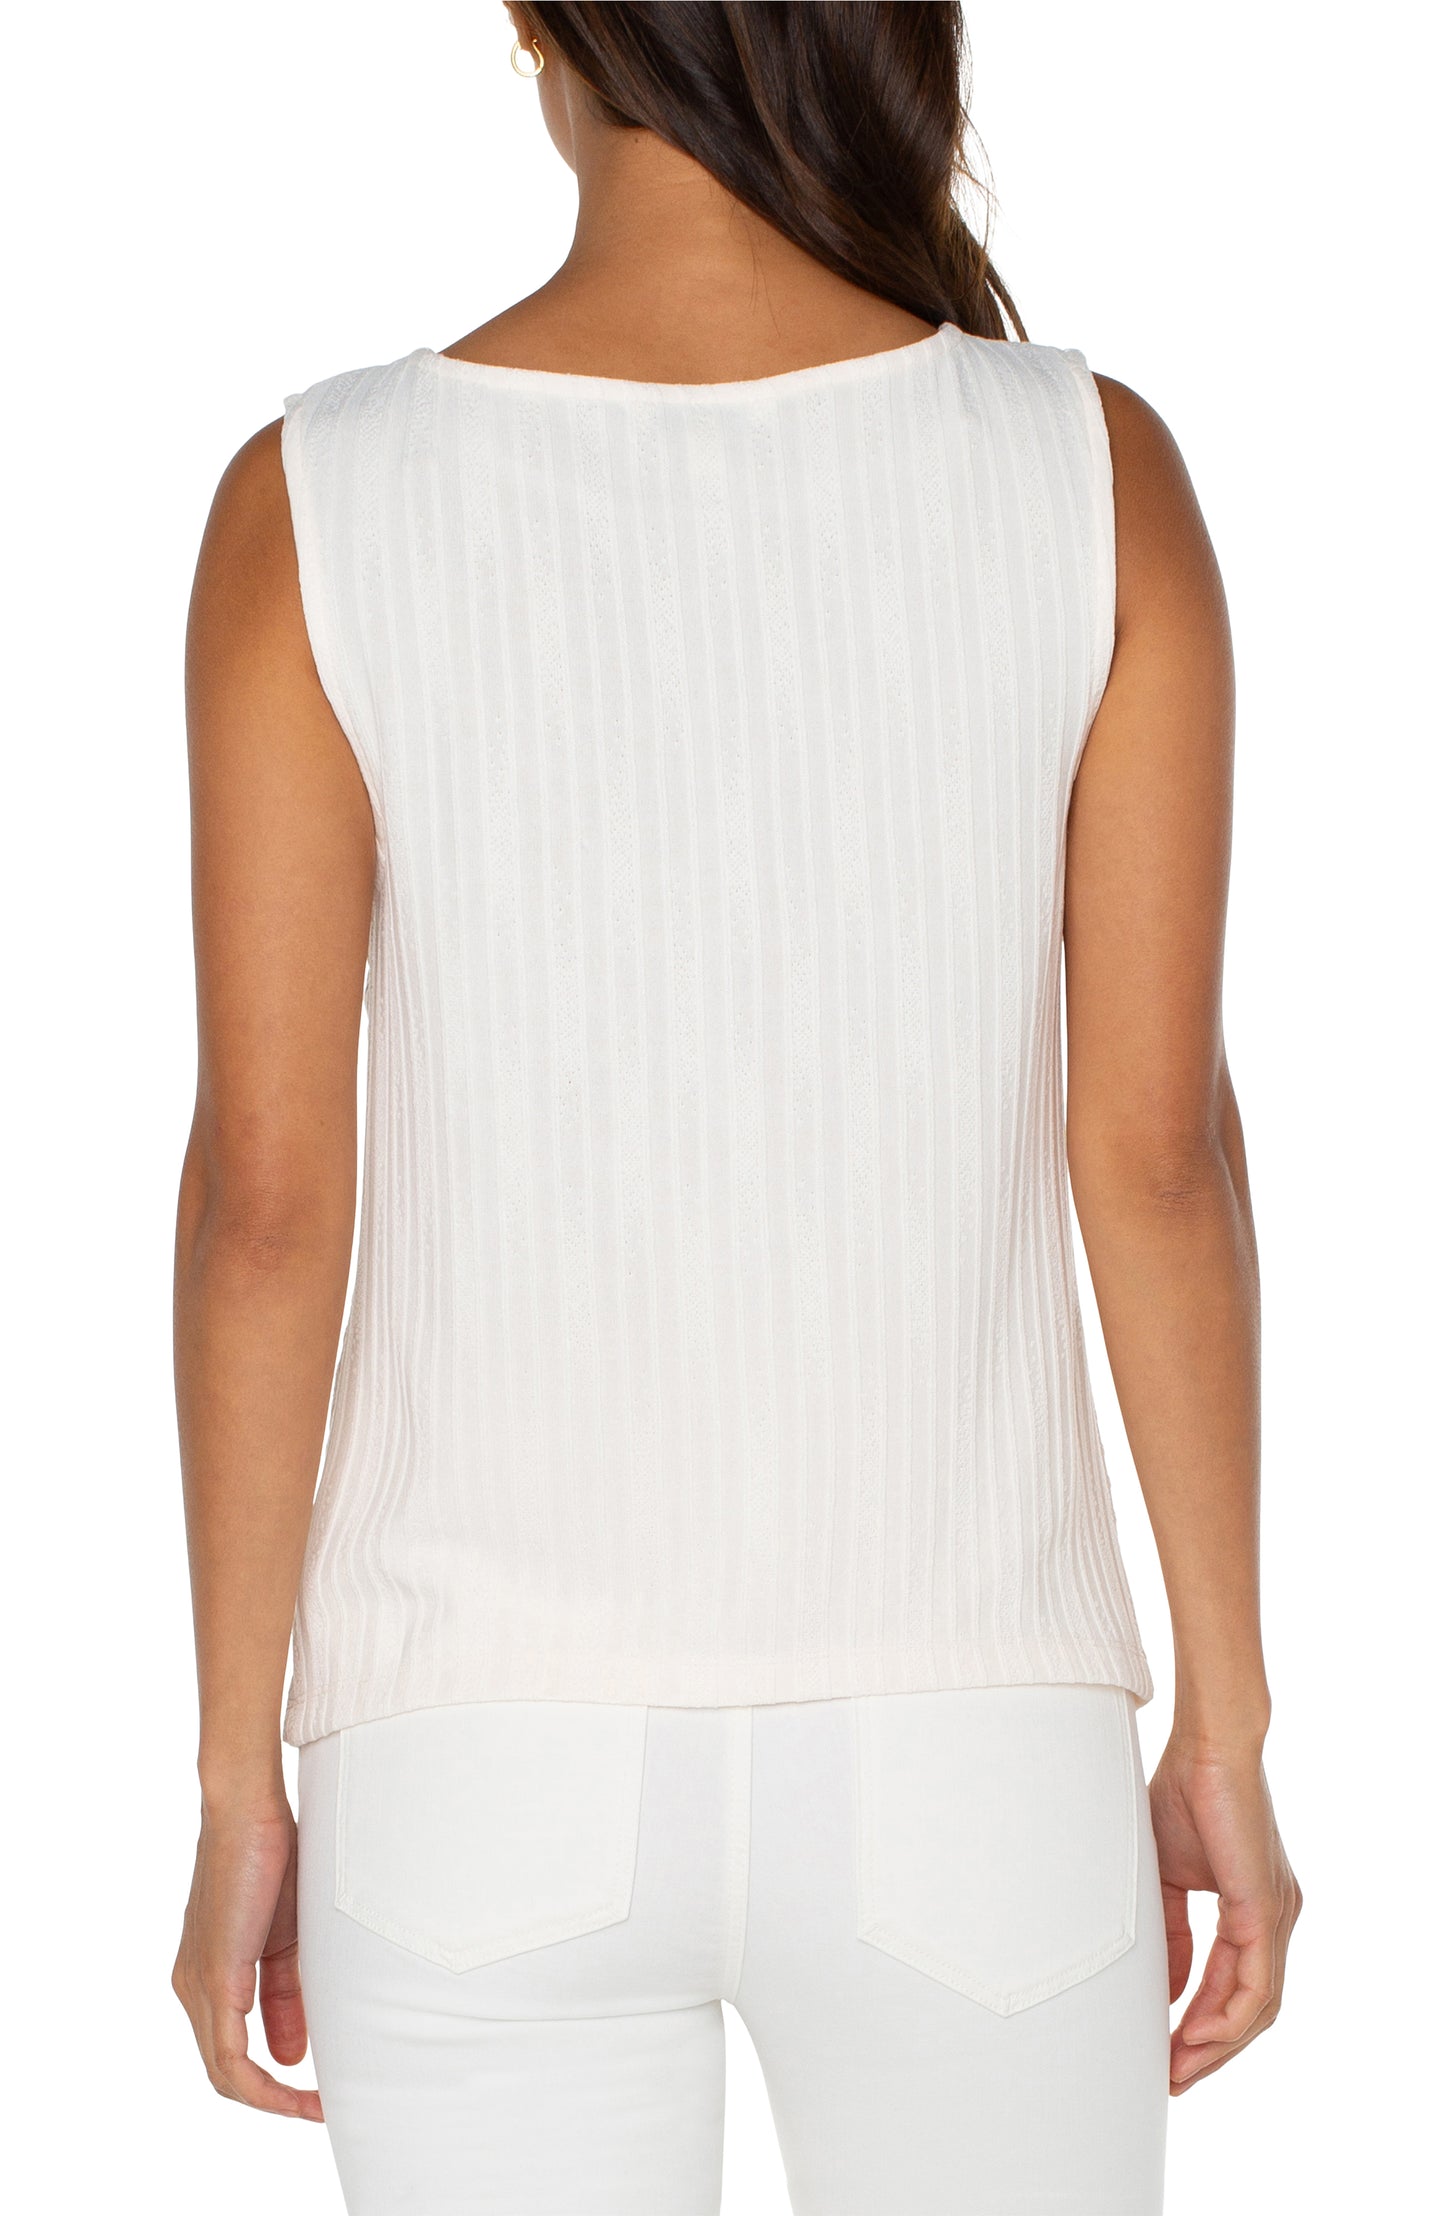 Liverpool Sleeveless Miter Front Boat Neck Knit Top (French Cream)